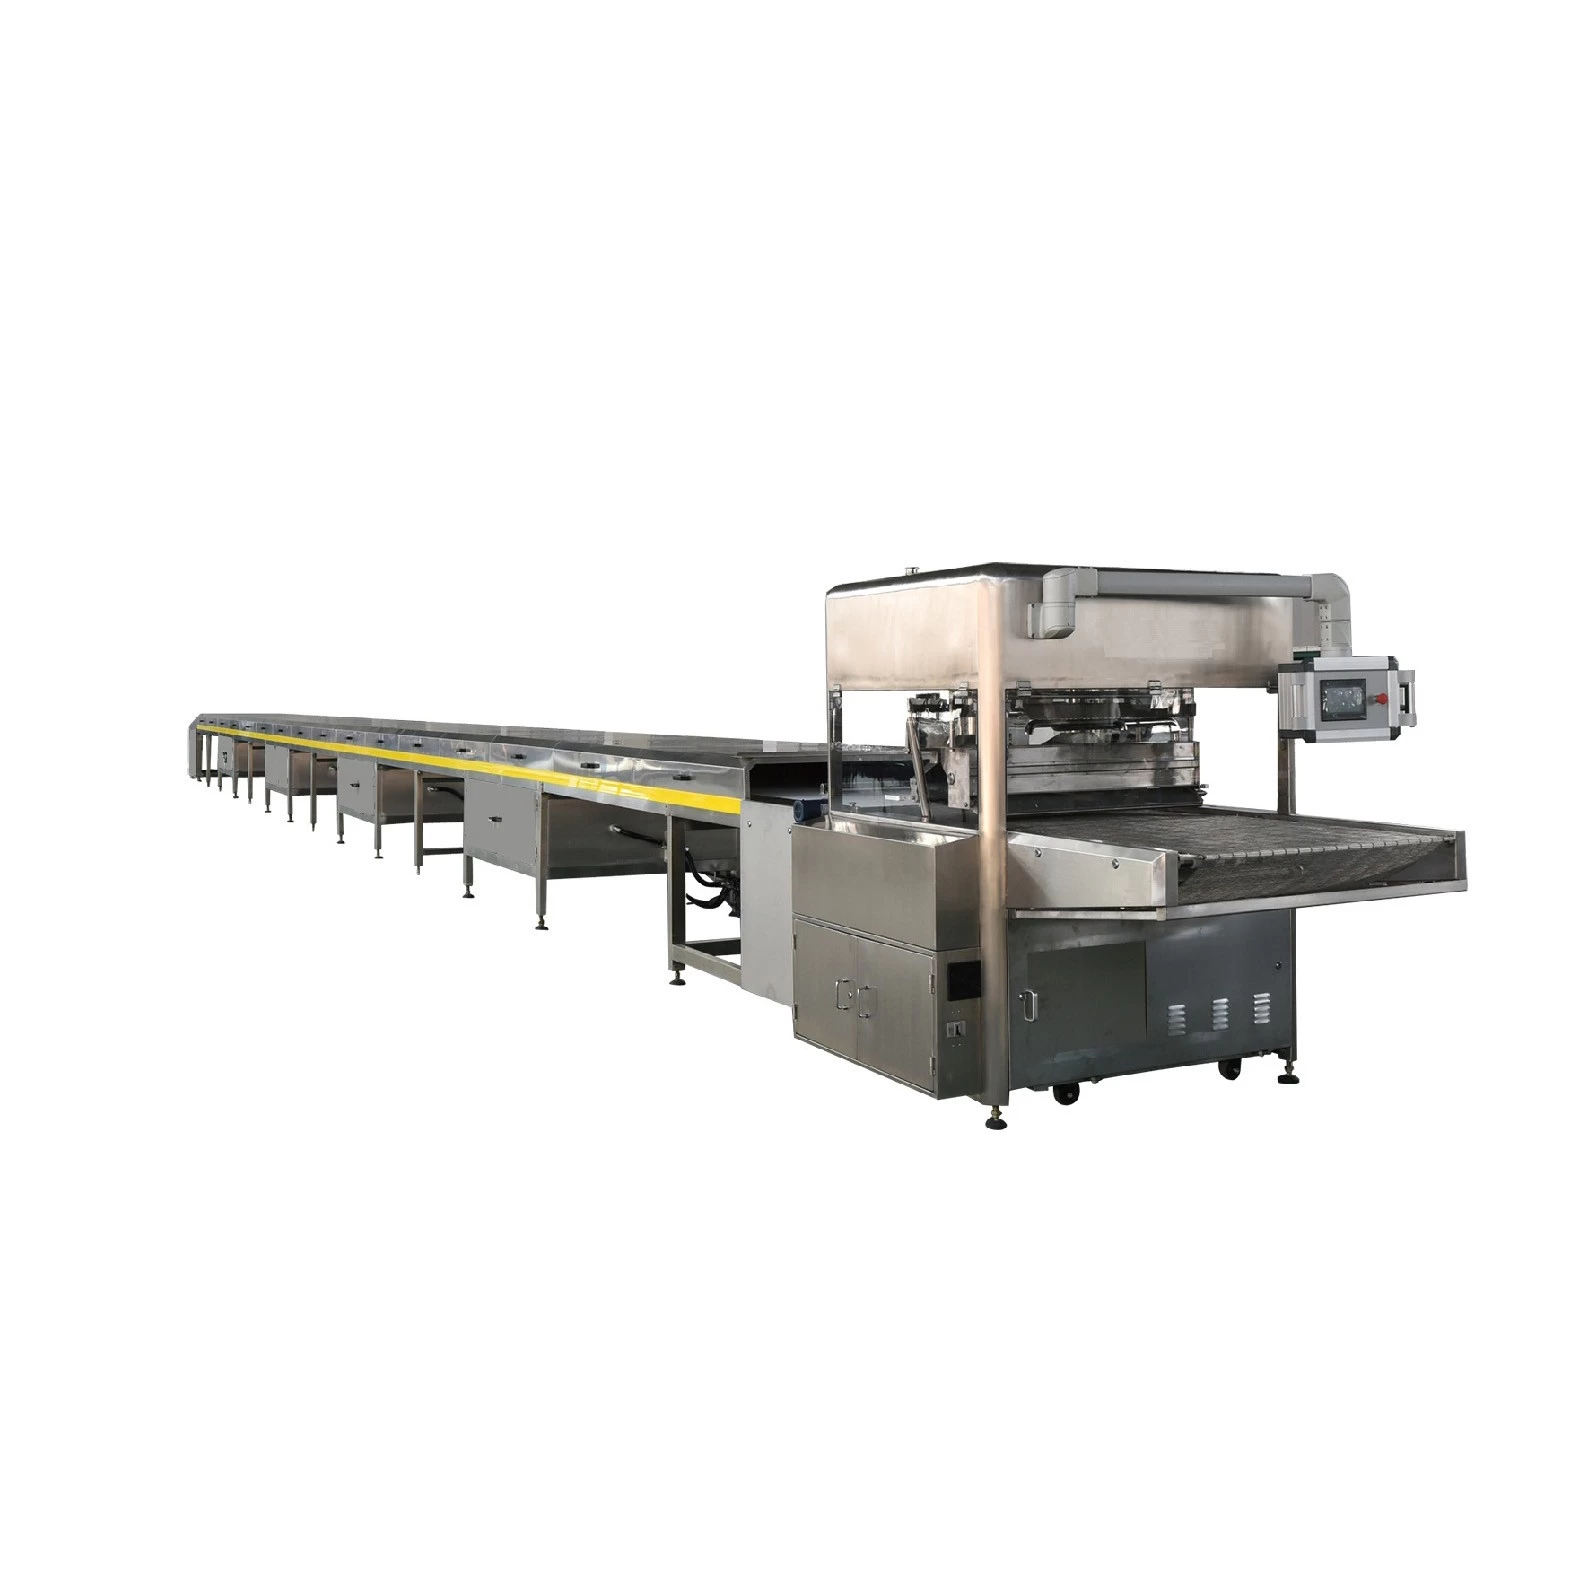 China CE Certificate Food Processing Equipment Chocolate Enrobing Machine manufacturer